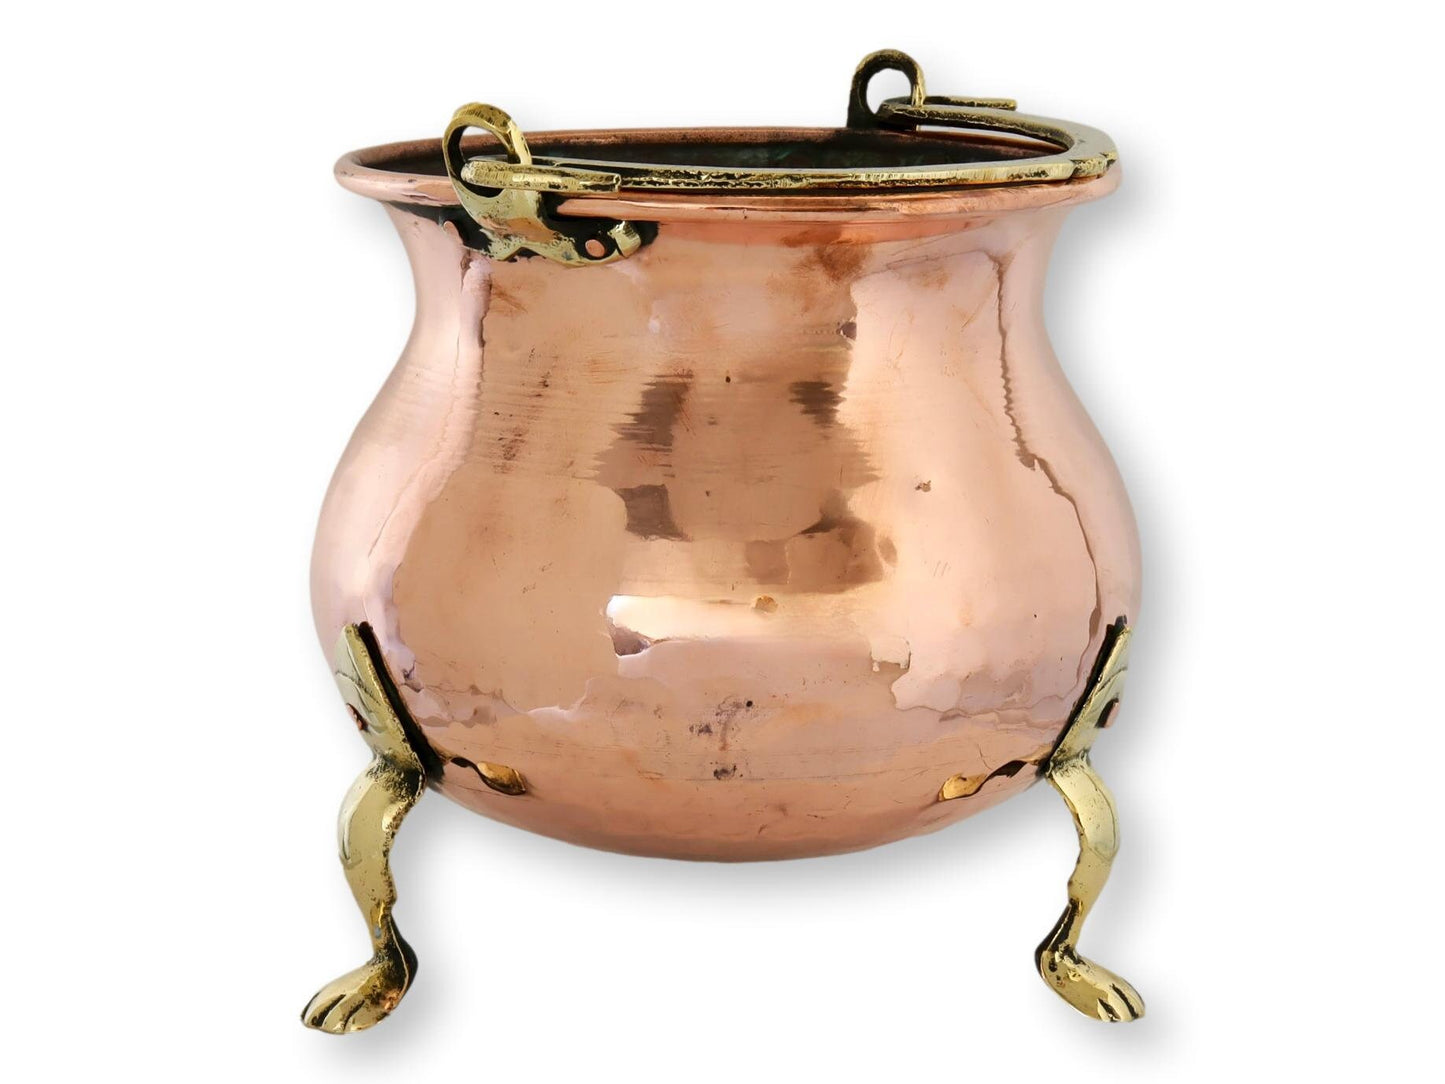 Antique English Footed Copper Cauldron